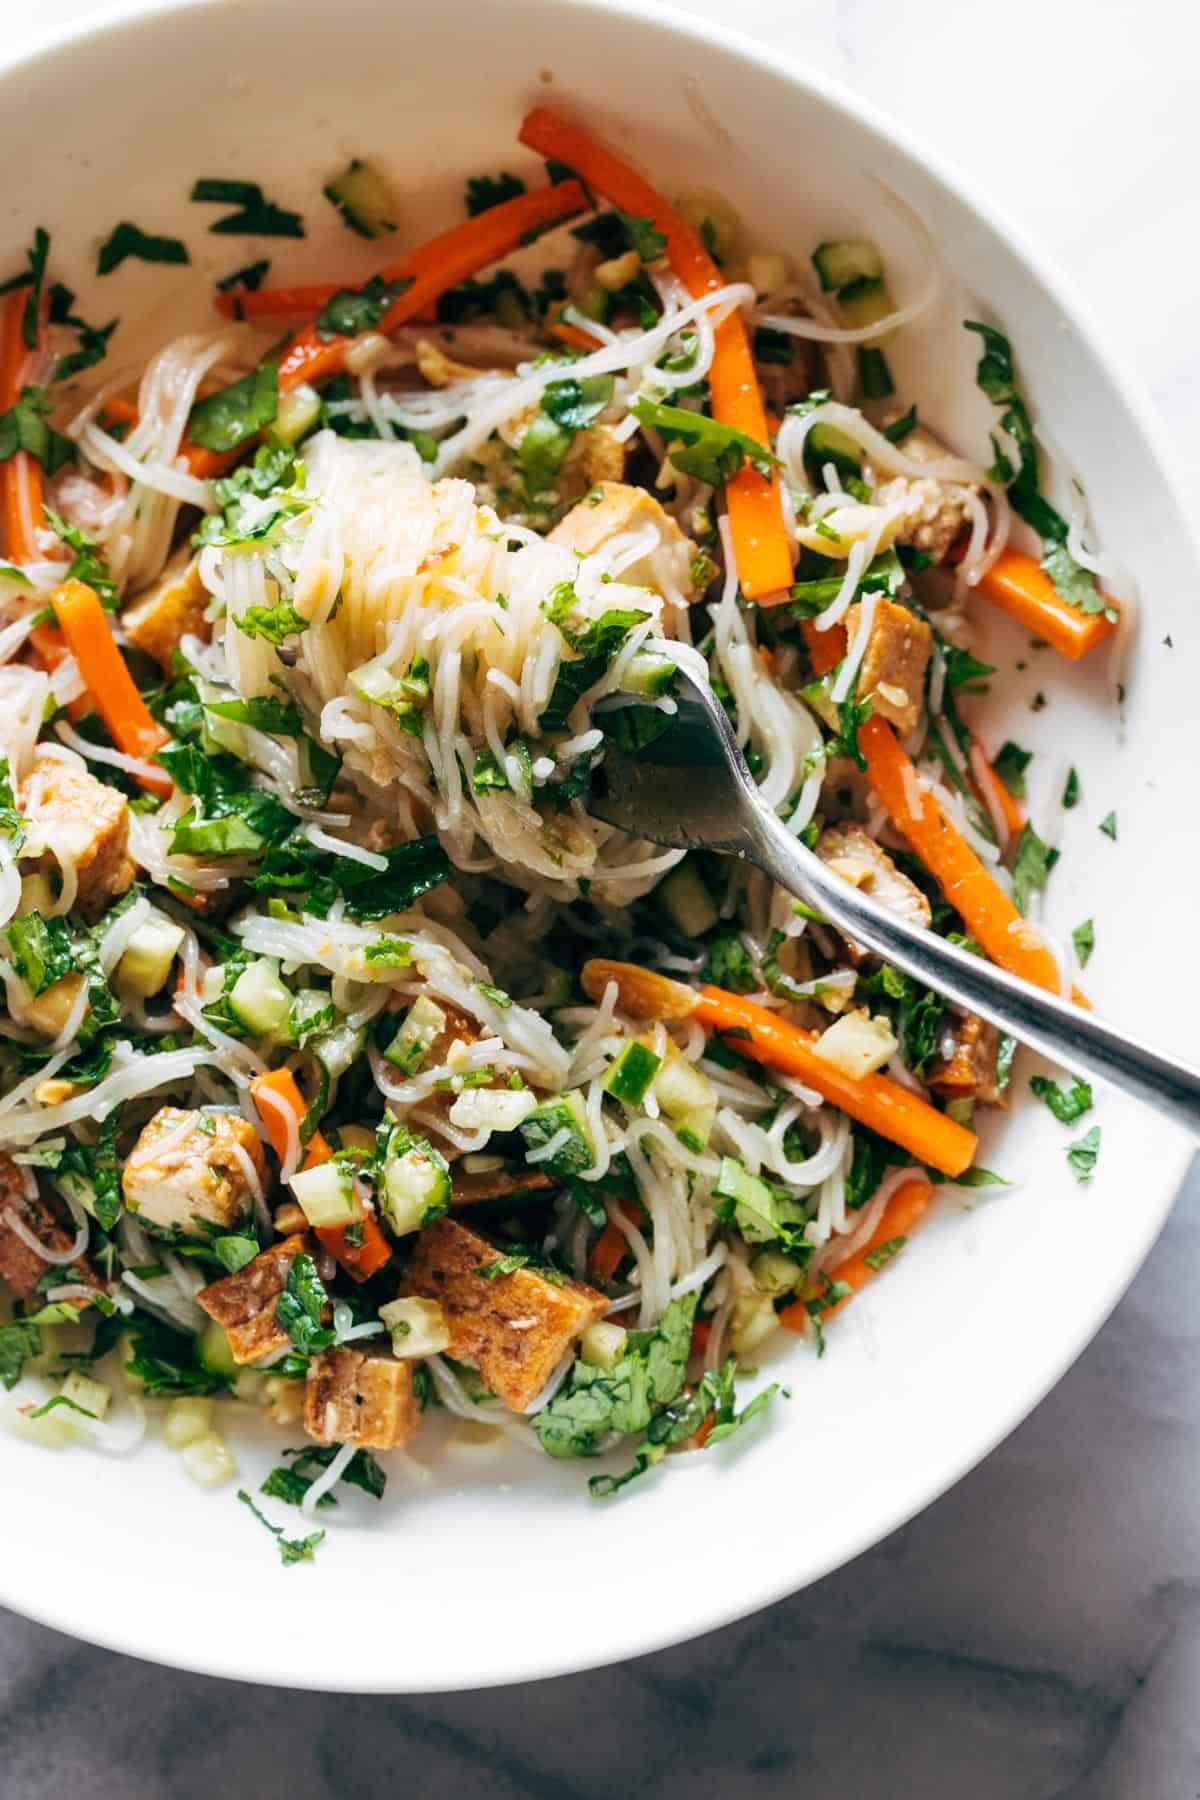 Vermicelli salad mixed up in a bowl.